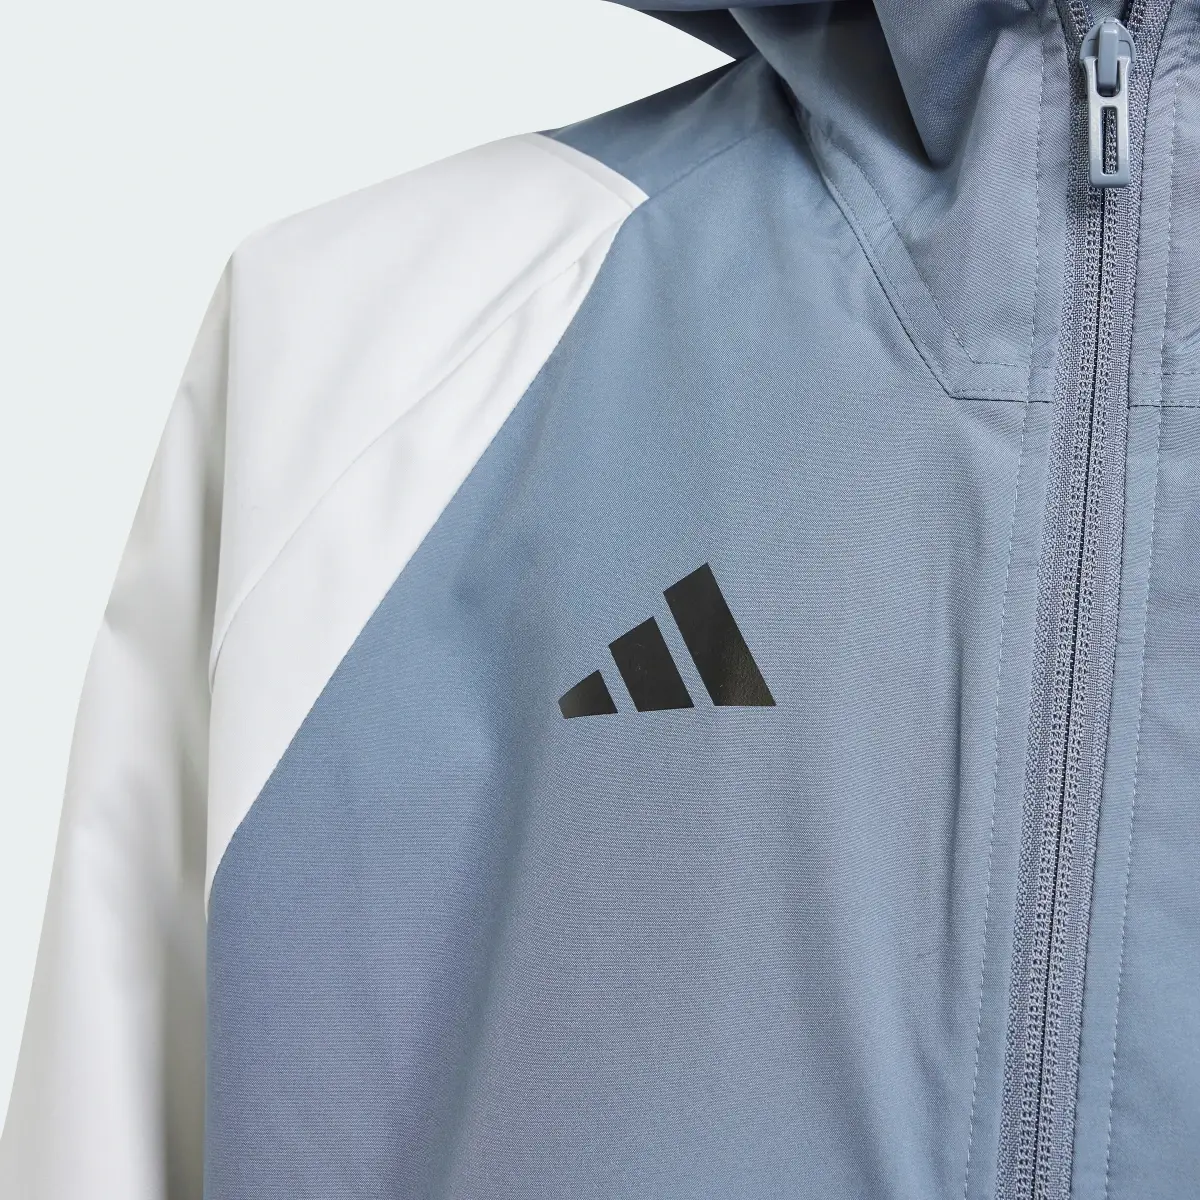 Adidas Tiro 23 Competition All-Weather Jacket. 3